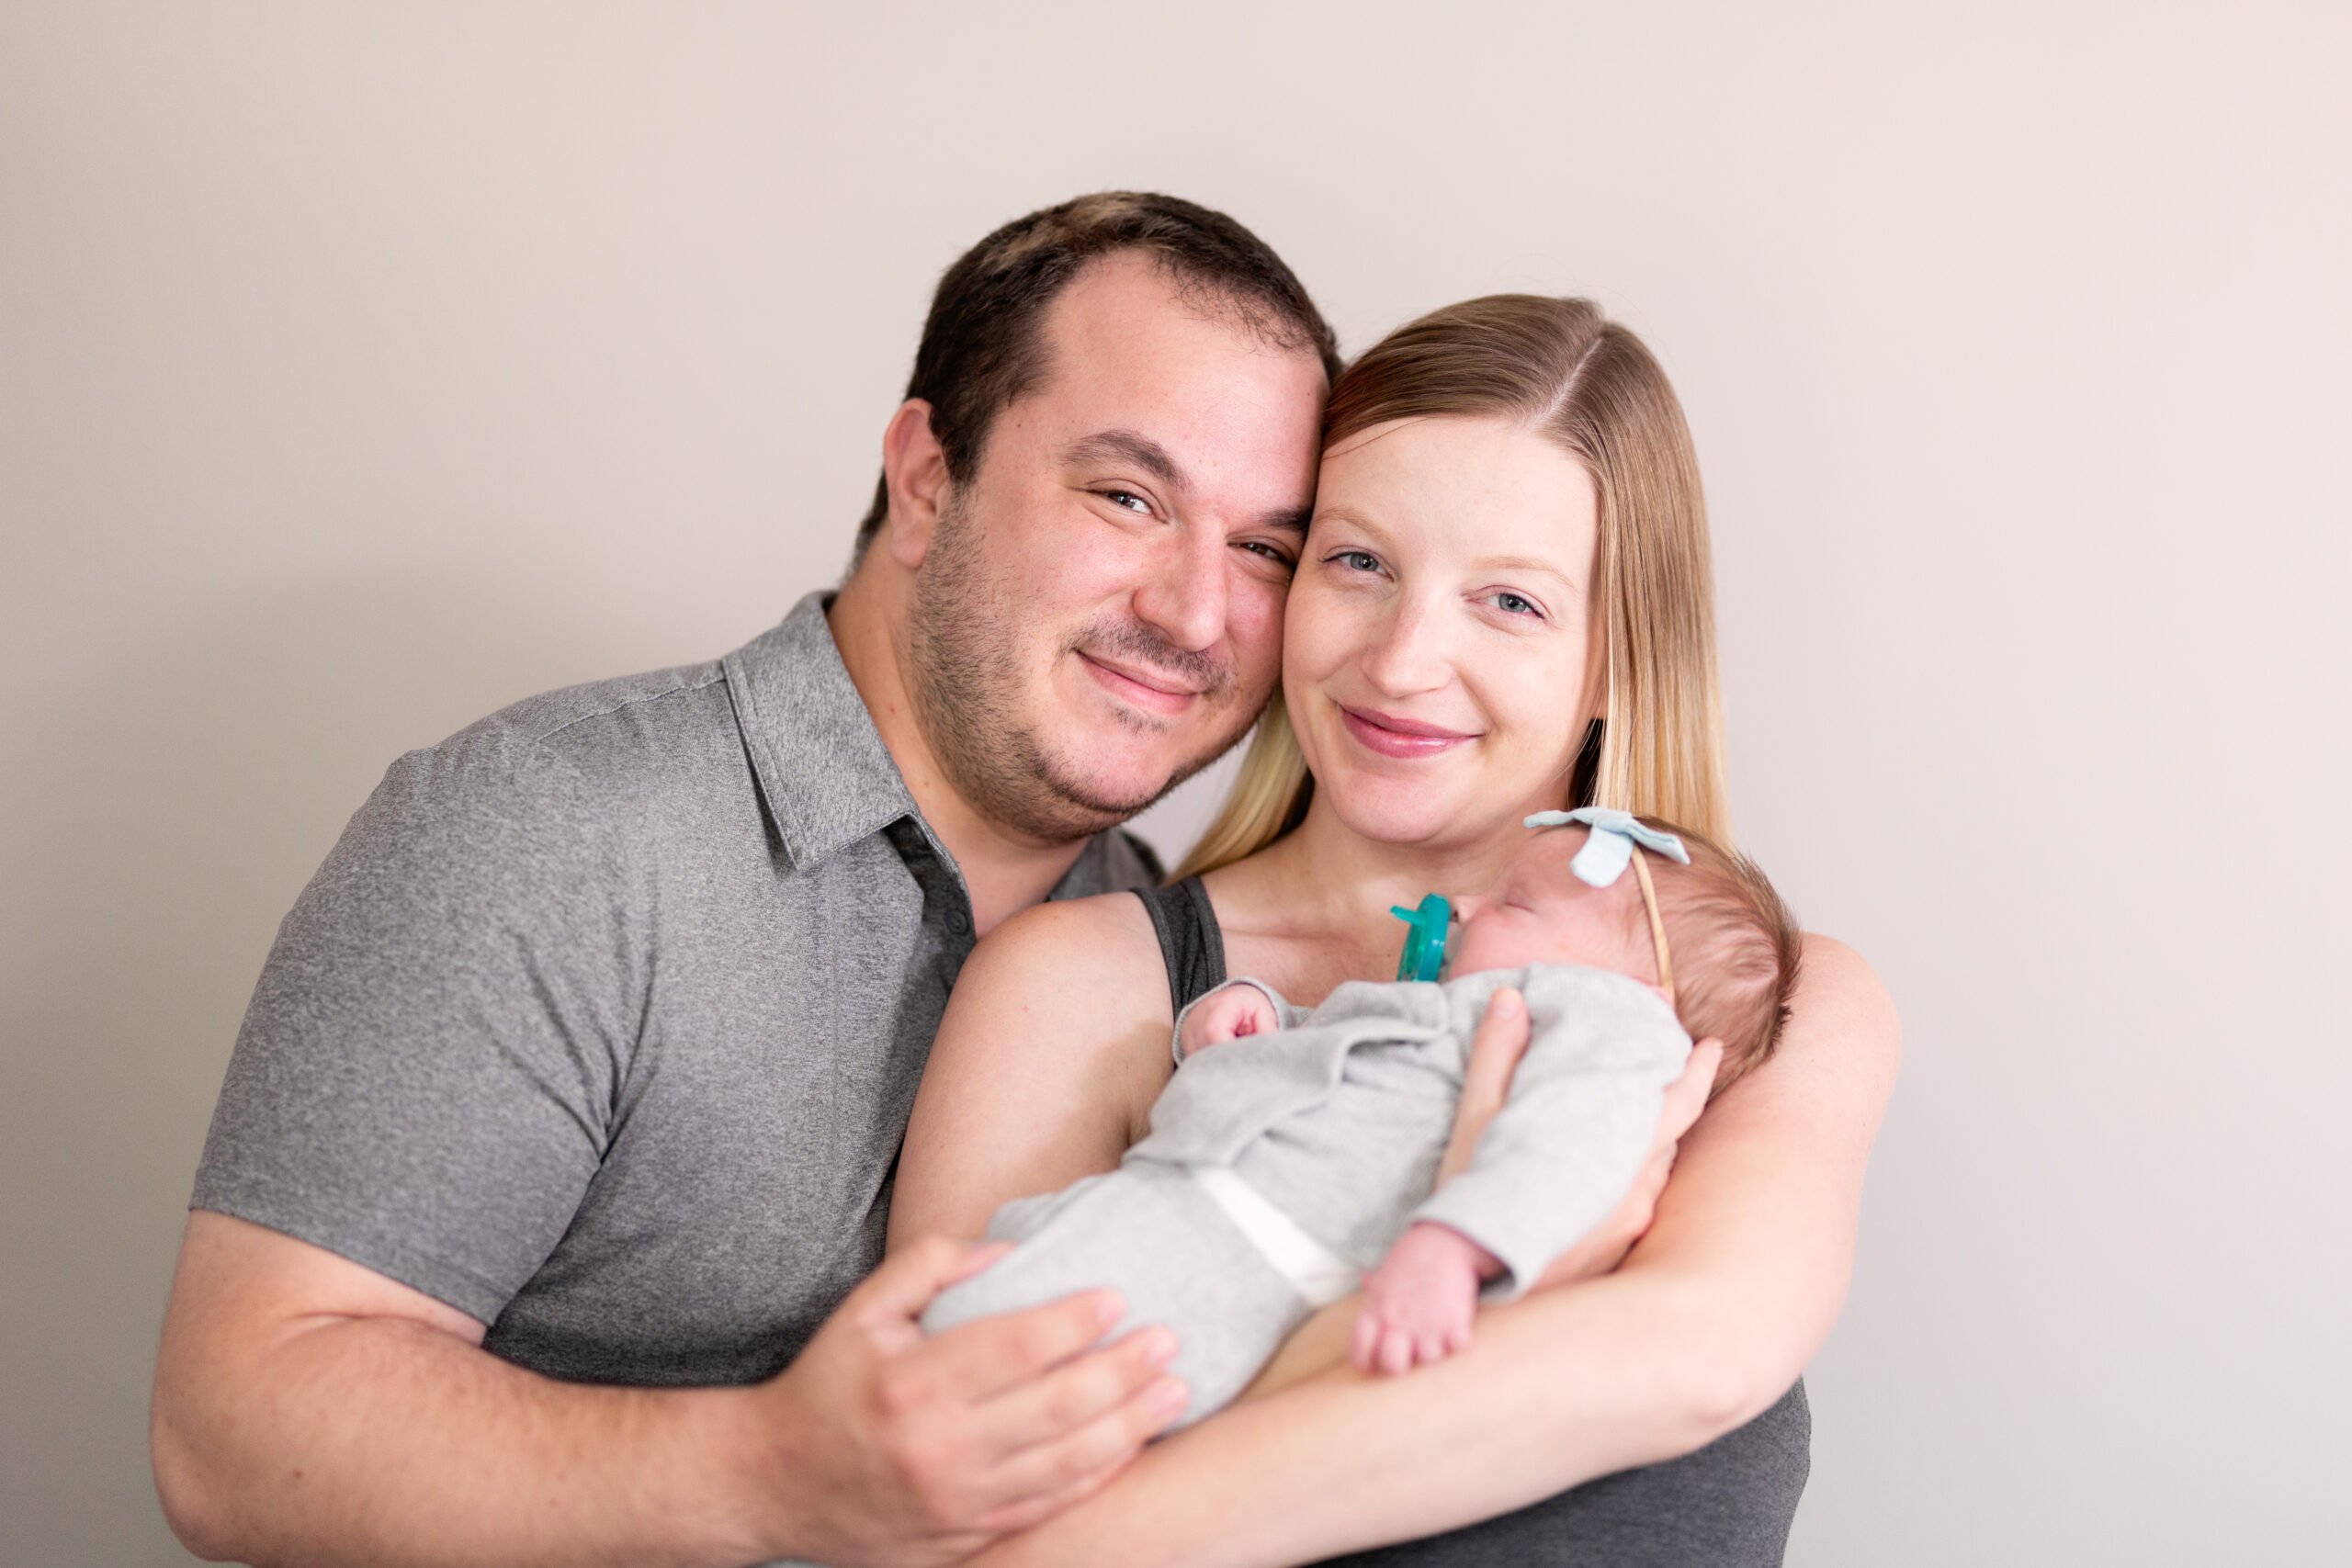 in-home lifestyle newborn session. family portrait of mom, dad, and baby